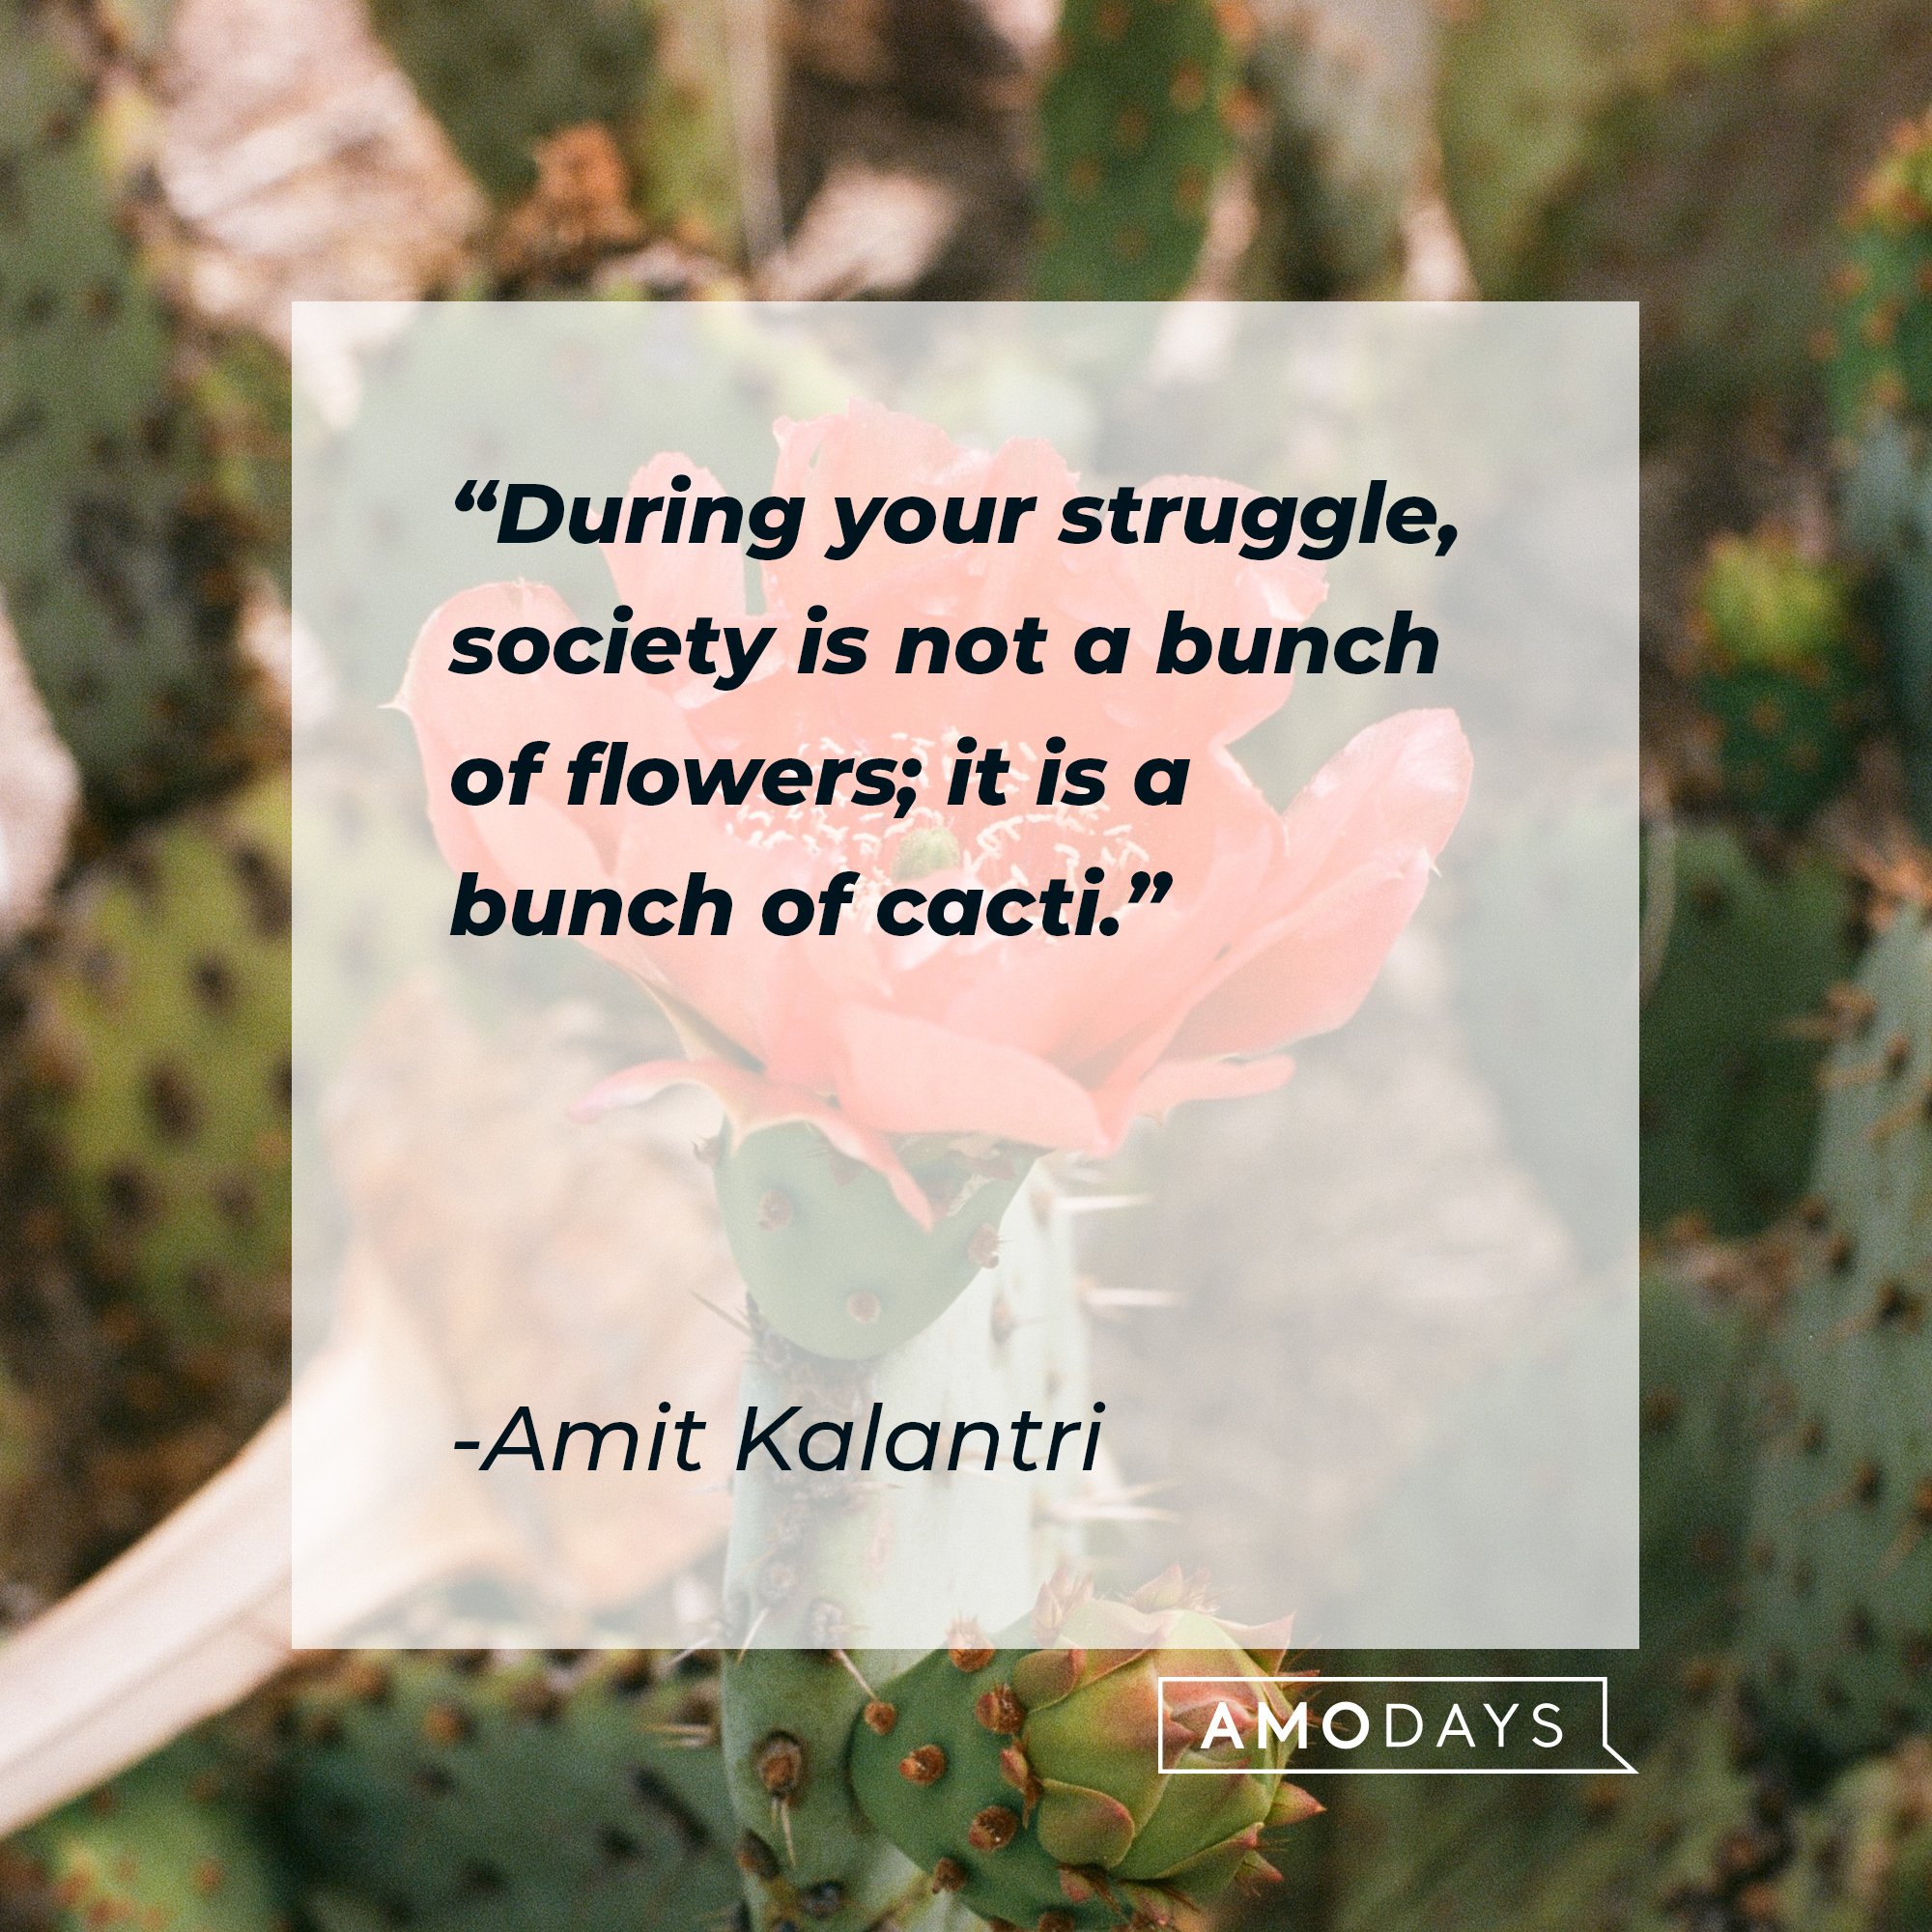 Amit Kalantri’s quote: "During your struggle, society is not a bunch of flowers; it is a bunch of cacti." | Image: AmoDays